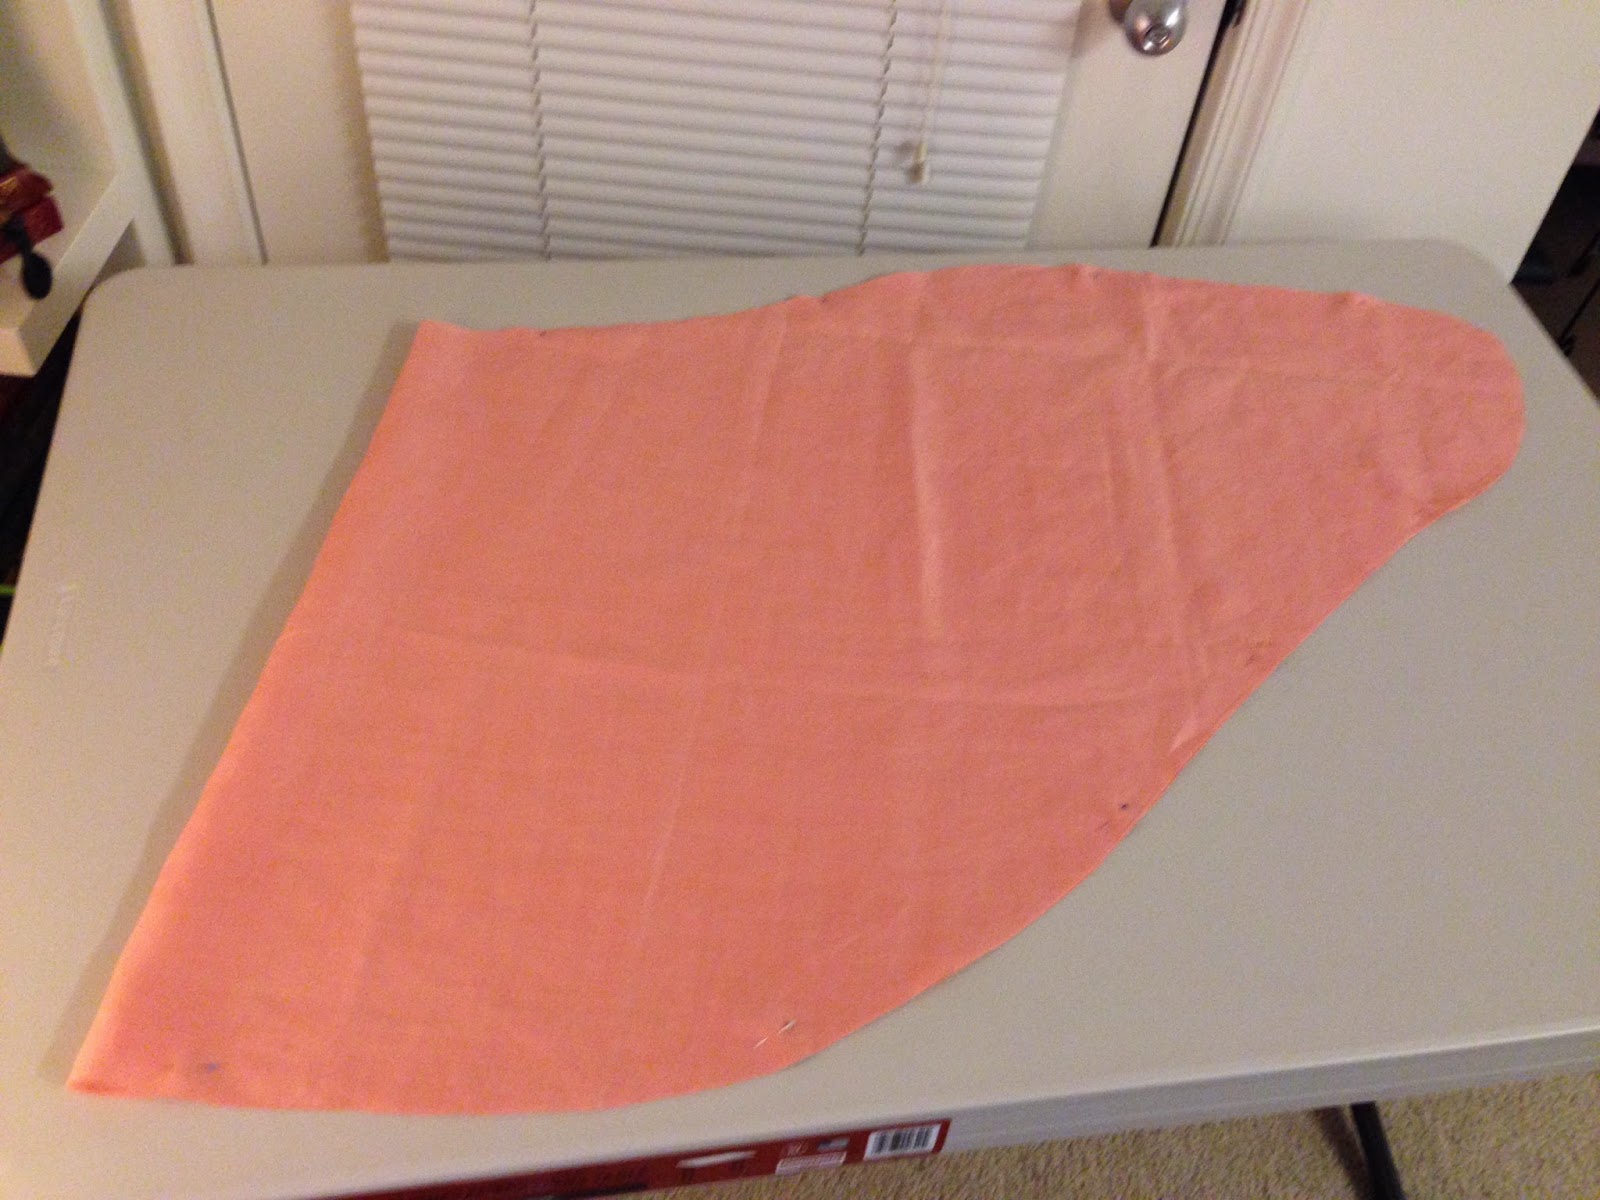 theladydetalle: Sewing update - 3 projects - 18th century short cloak